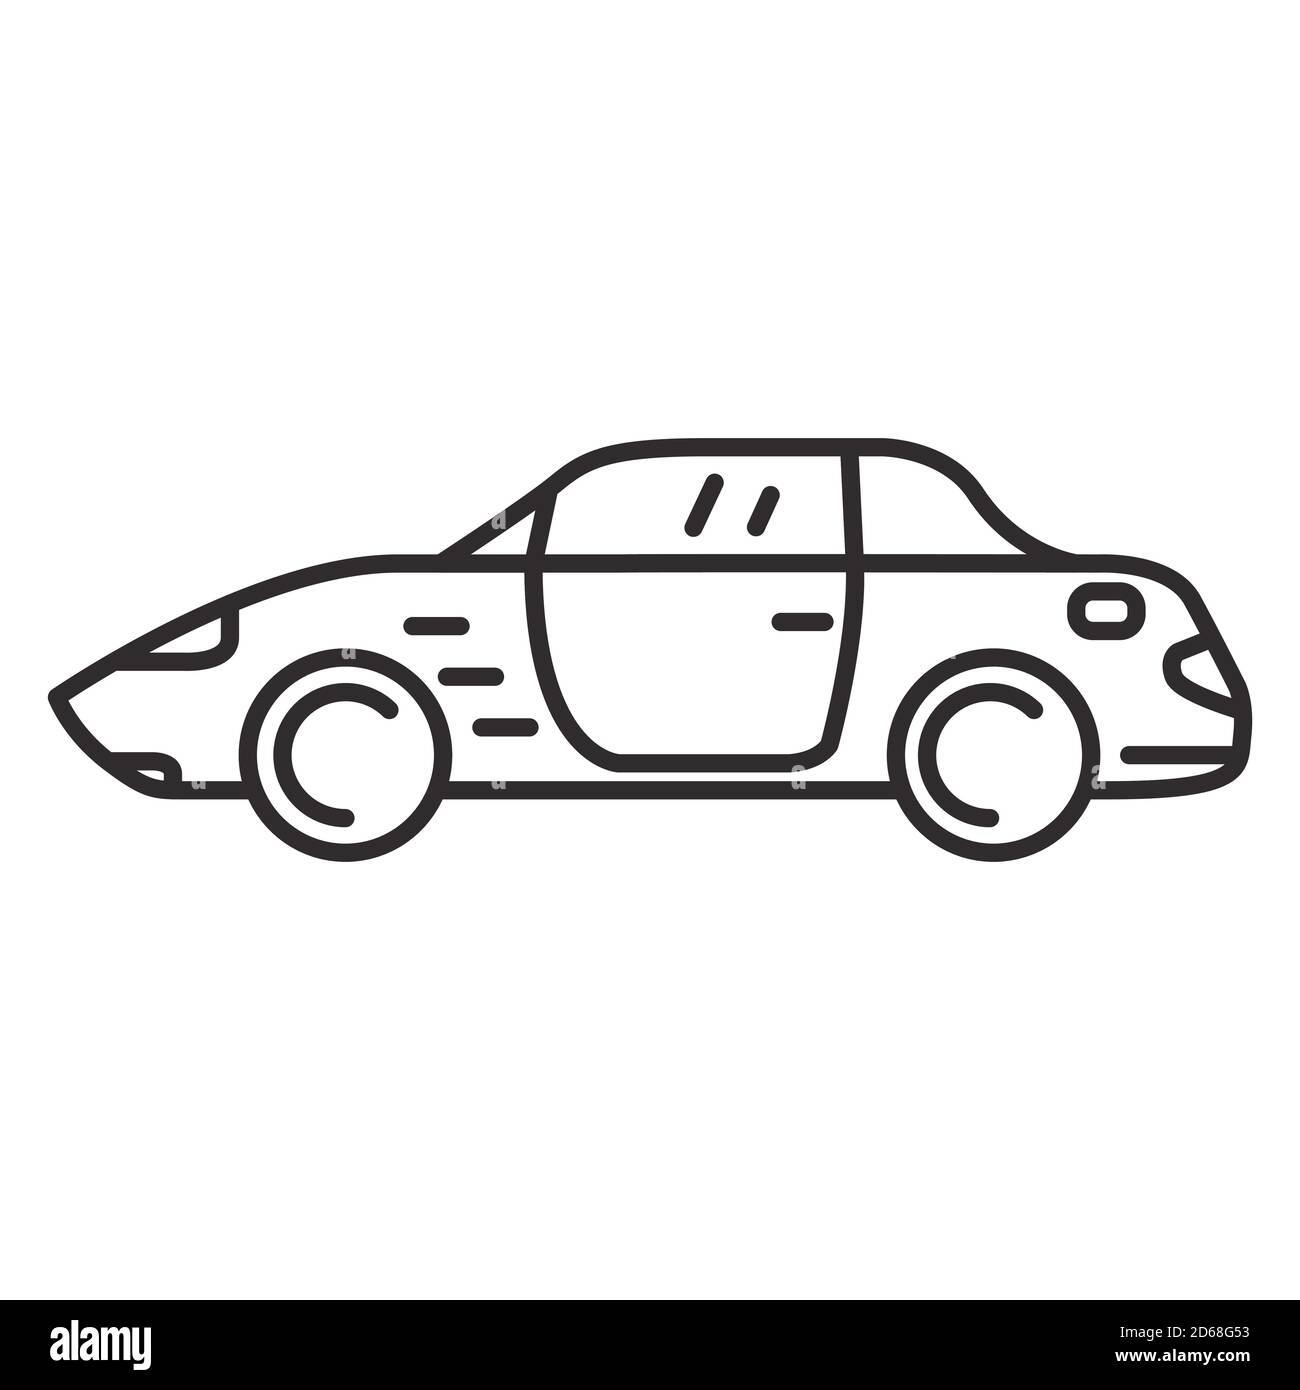 Coupe sports car icon outline. Line art vector. Stock Vector